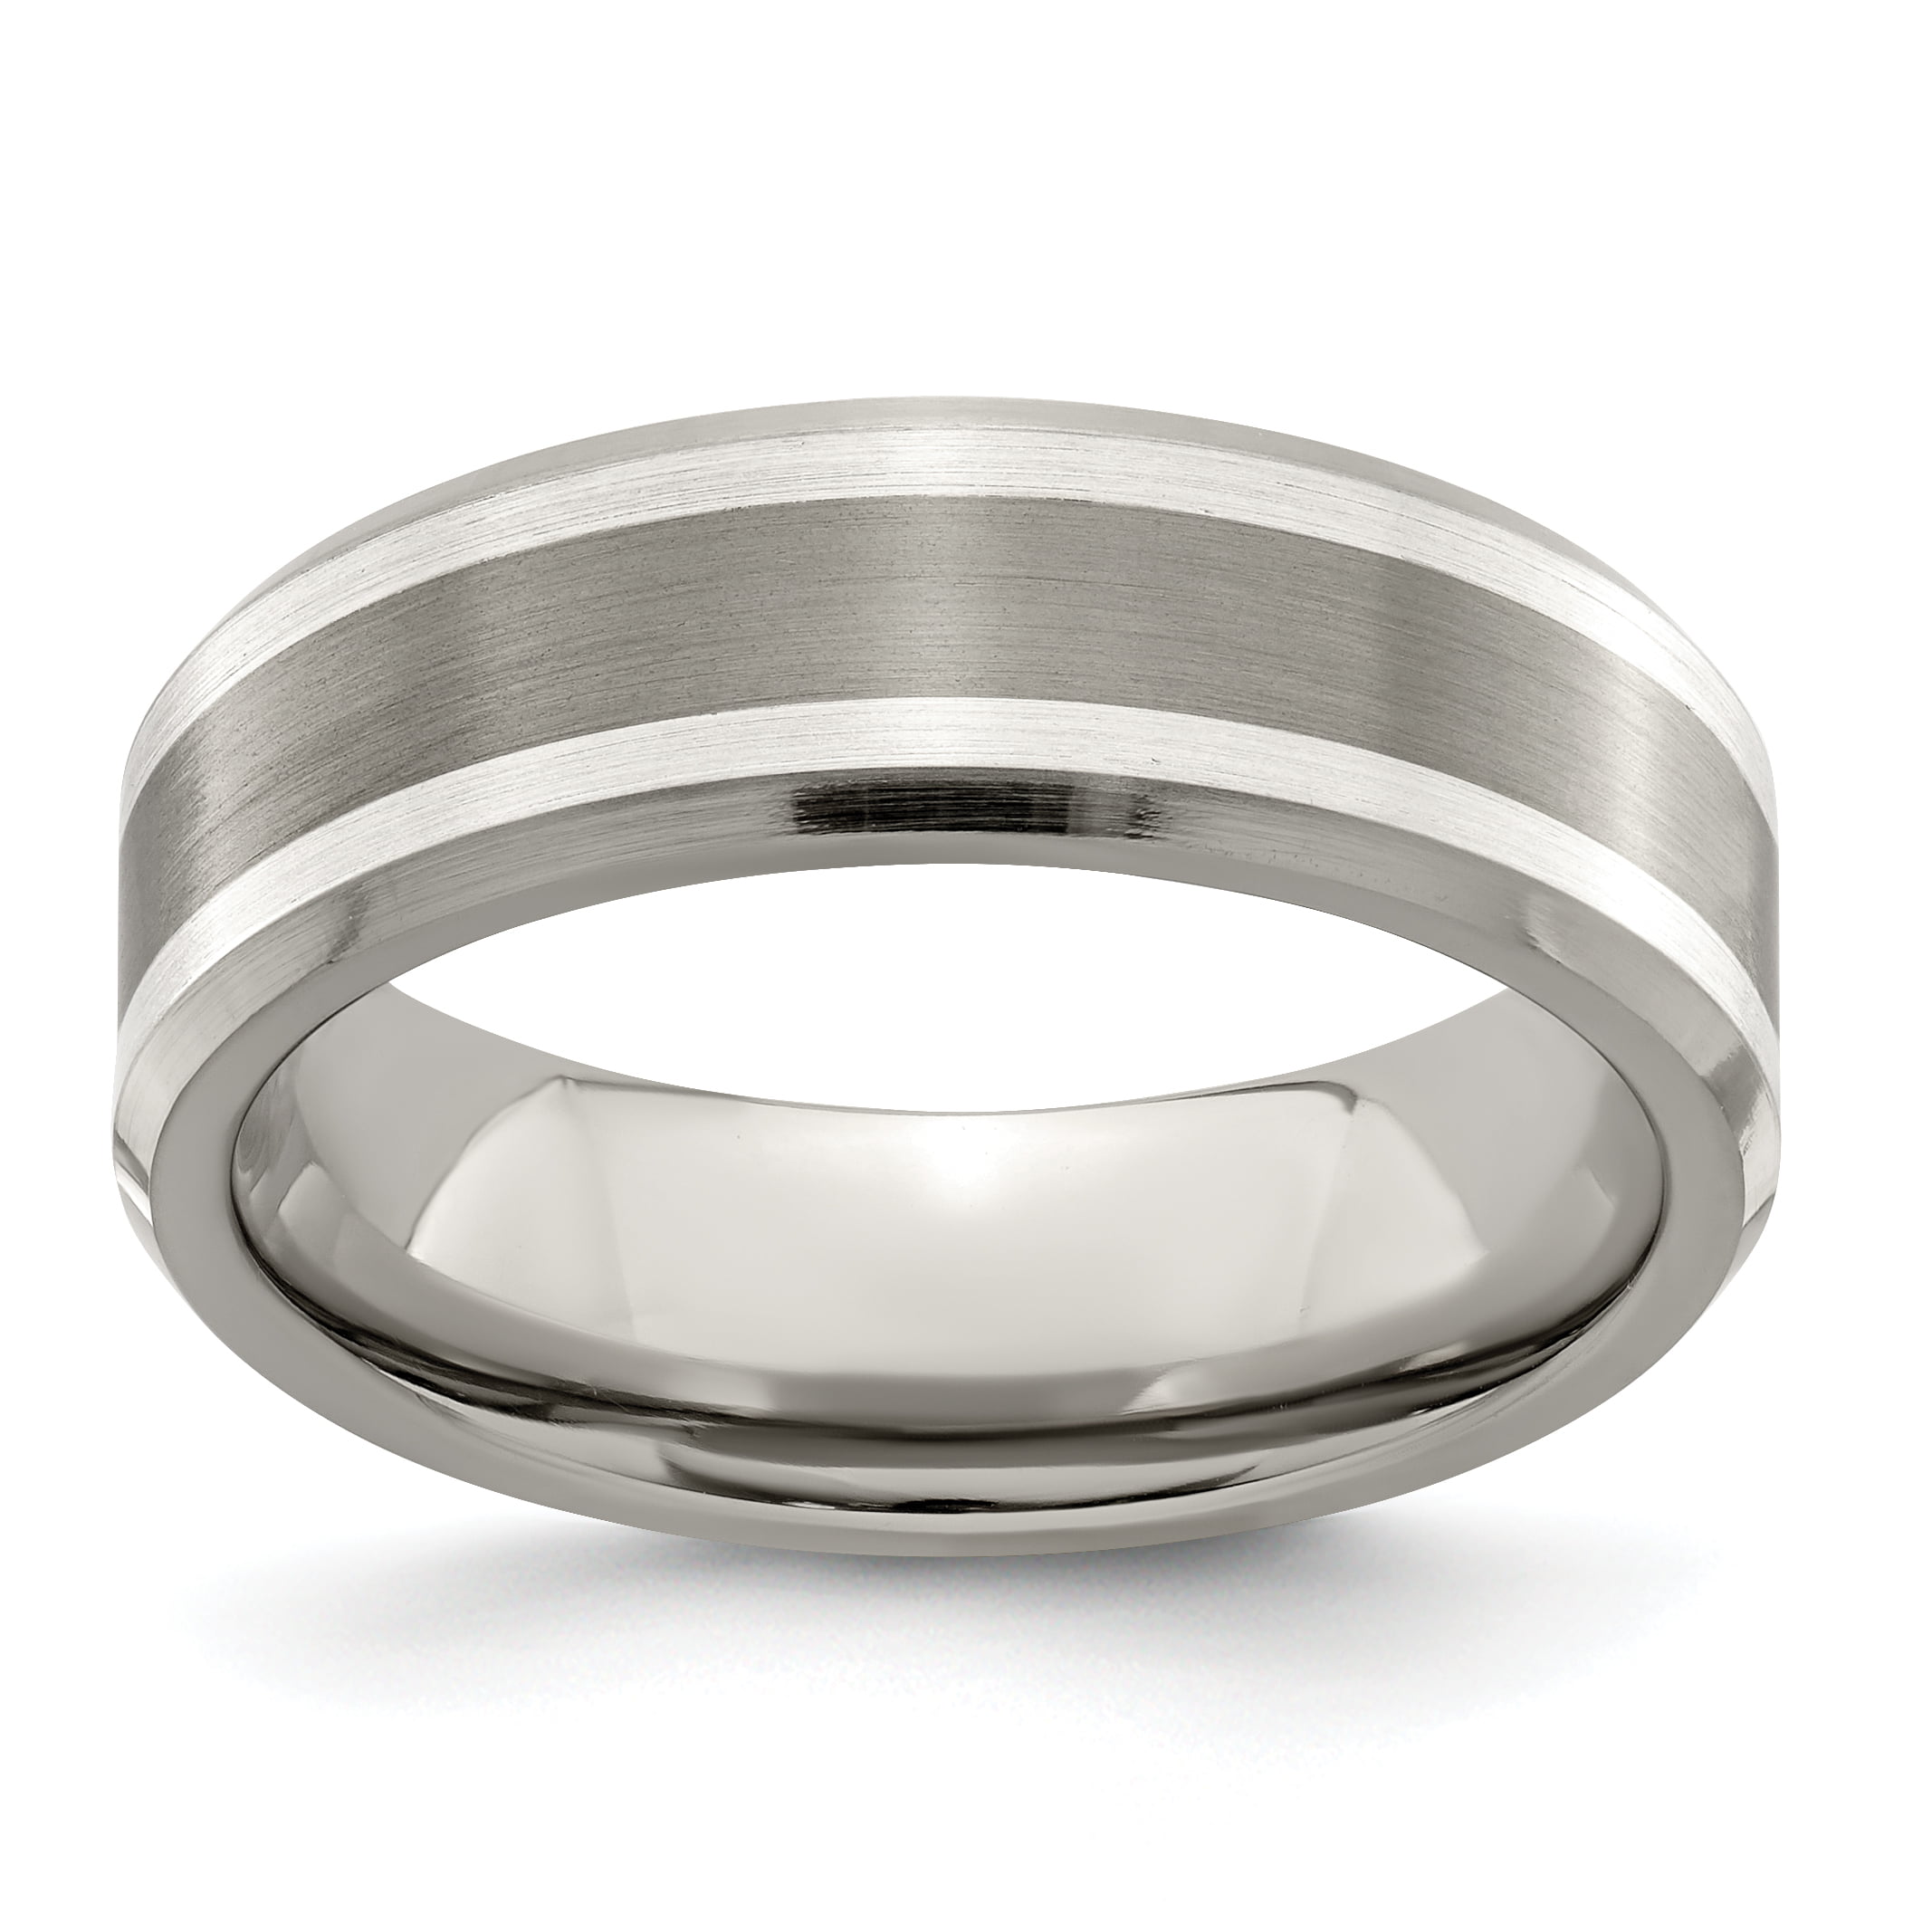 Mens Jewelry and Accessories Rings Wedding Bands Edward Mirell Titanium Faceted Edge Brushed and Polished 12mm Ring Size 9